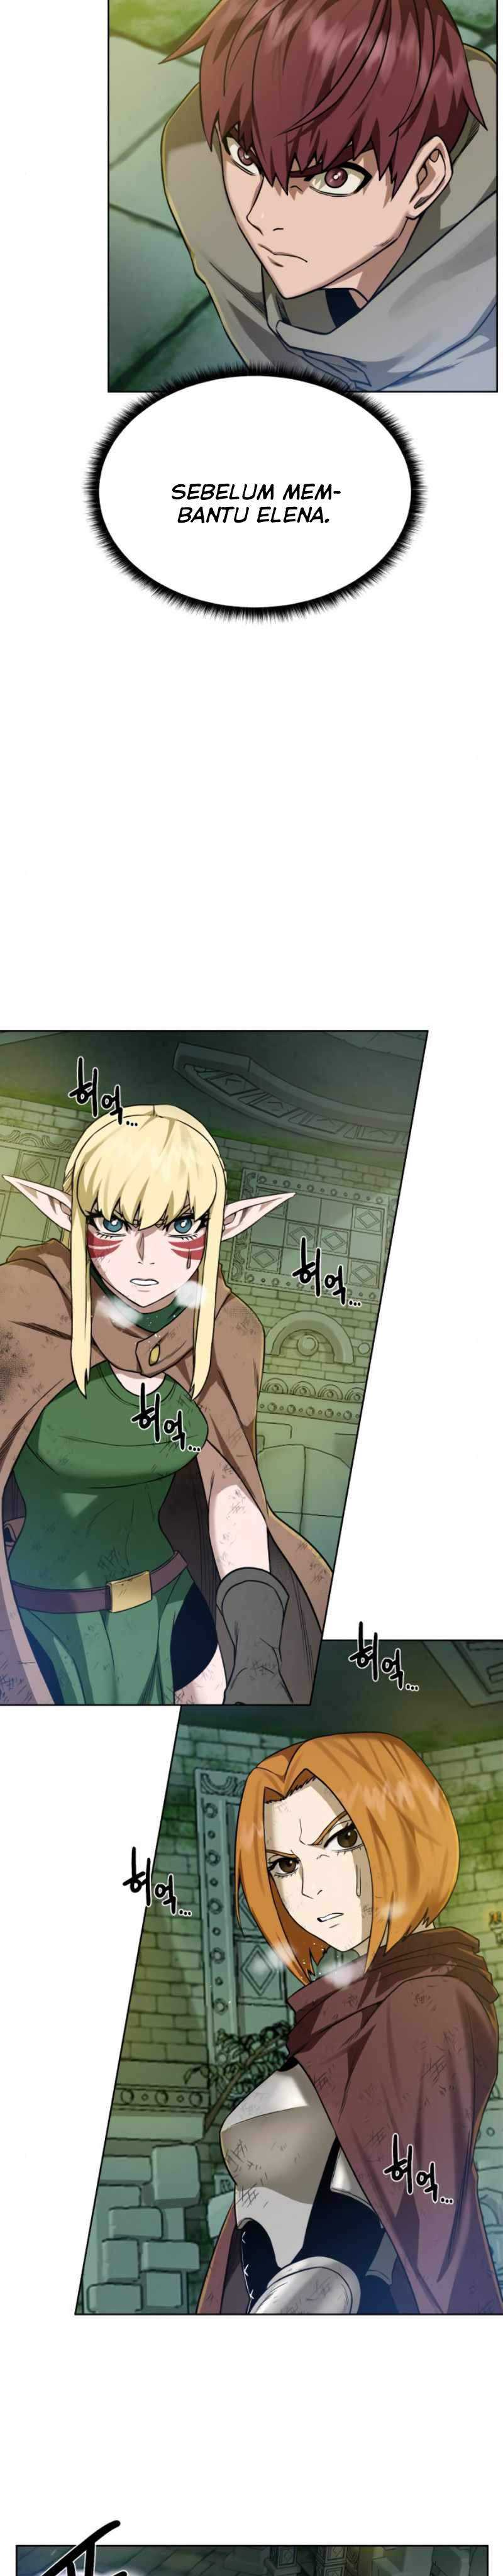 dungeons-artifacts Chapter chapter-28